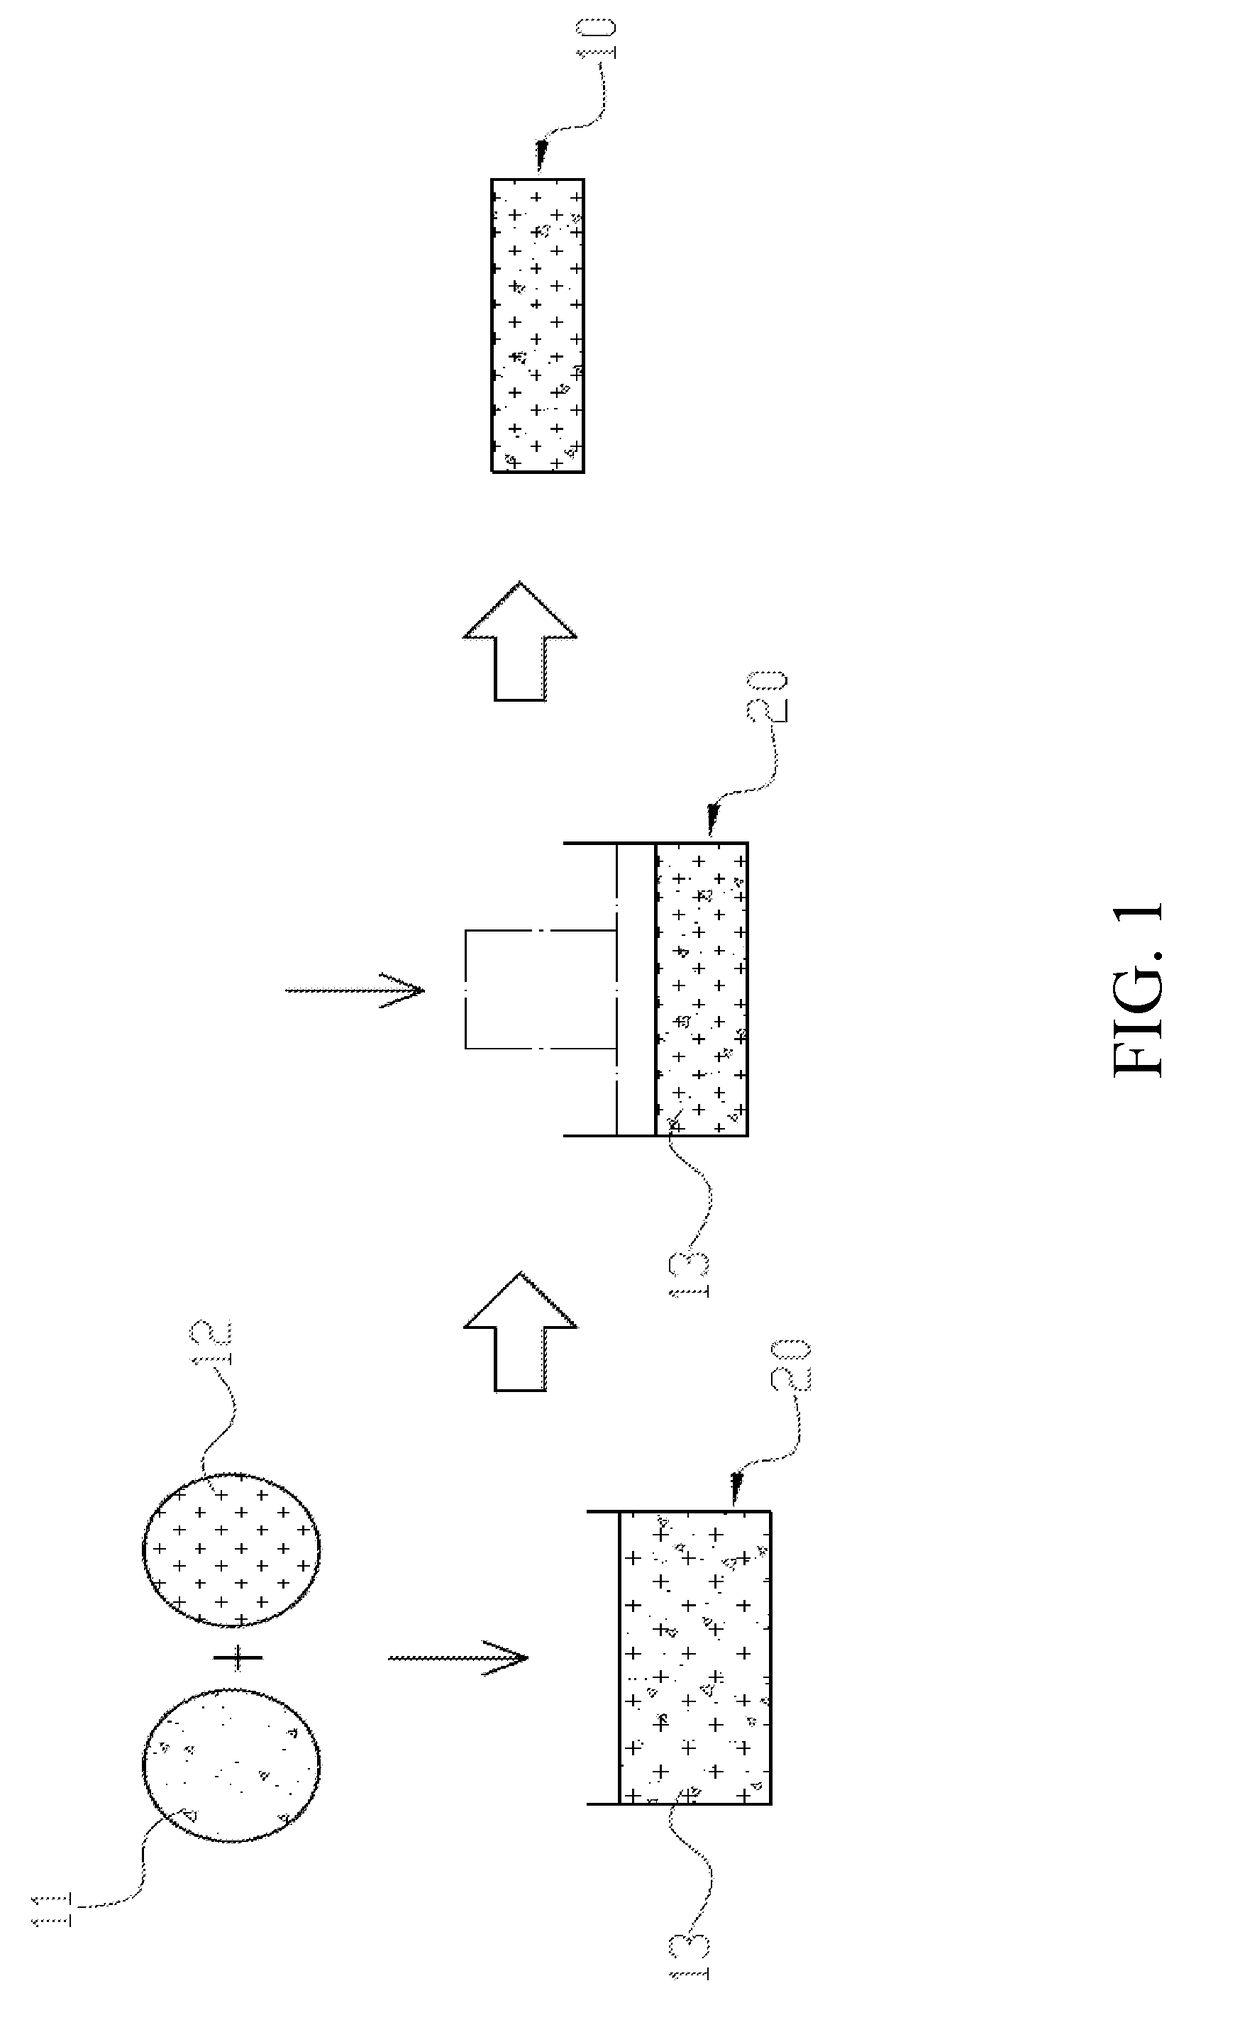 Method for groundwater remediation using sustained-release persulfate tablets